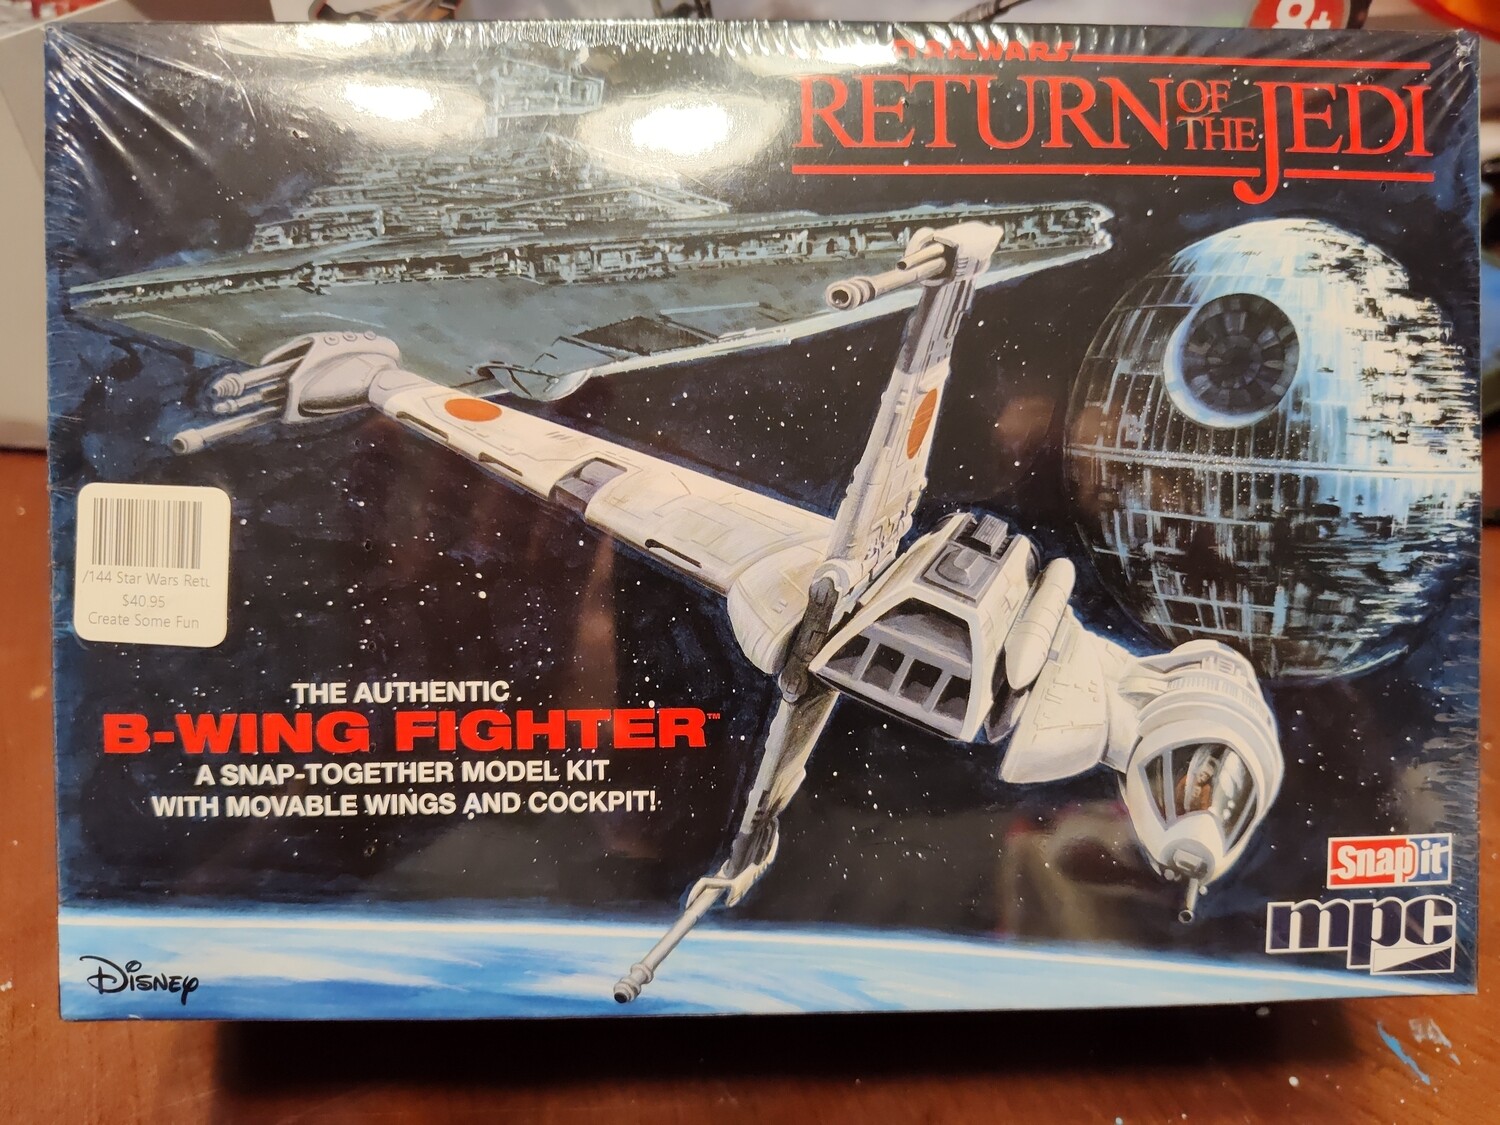 Snap 1/144 Star Wars Return of the Jedi: B-Wing Fighter (Snap)